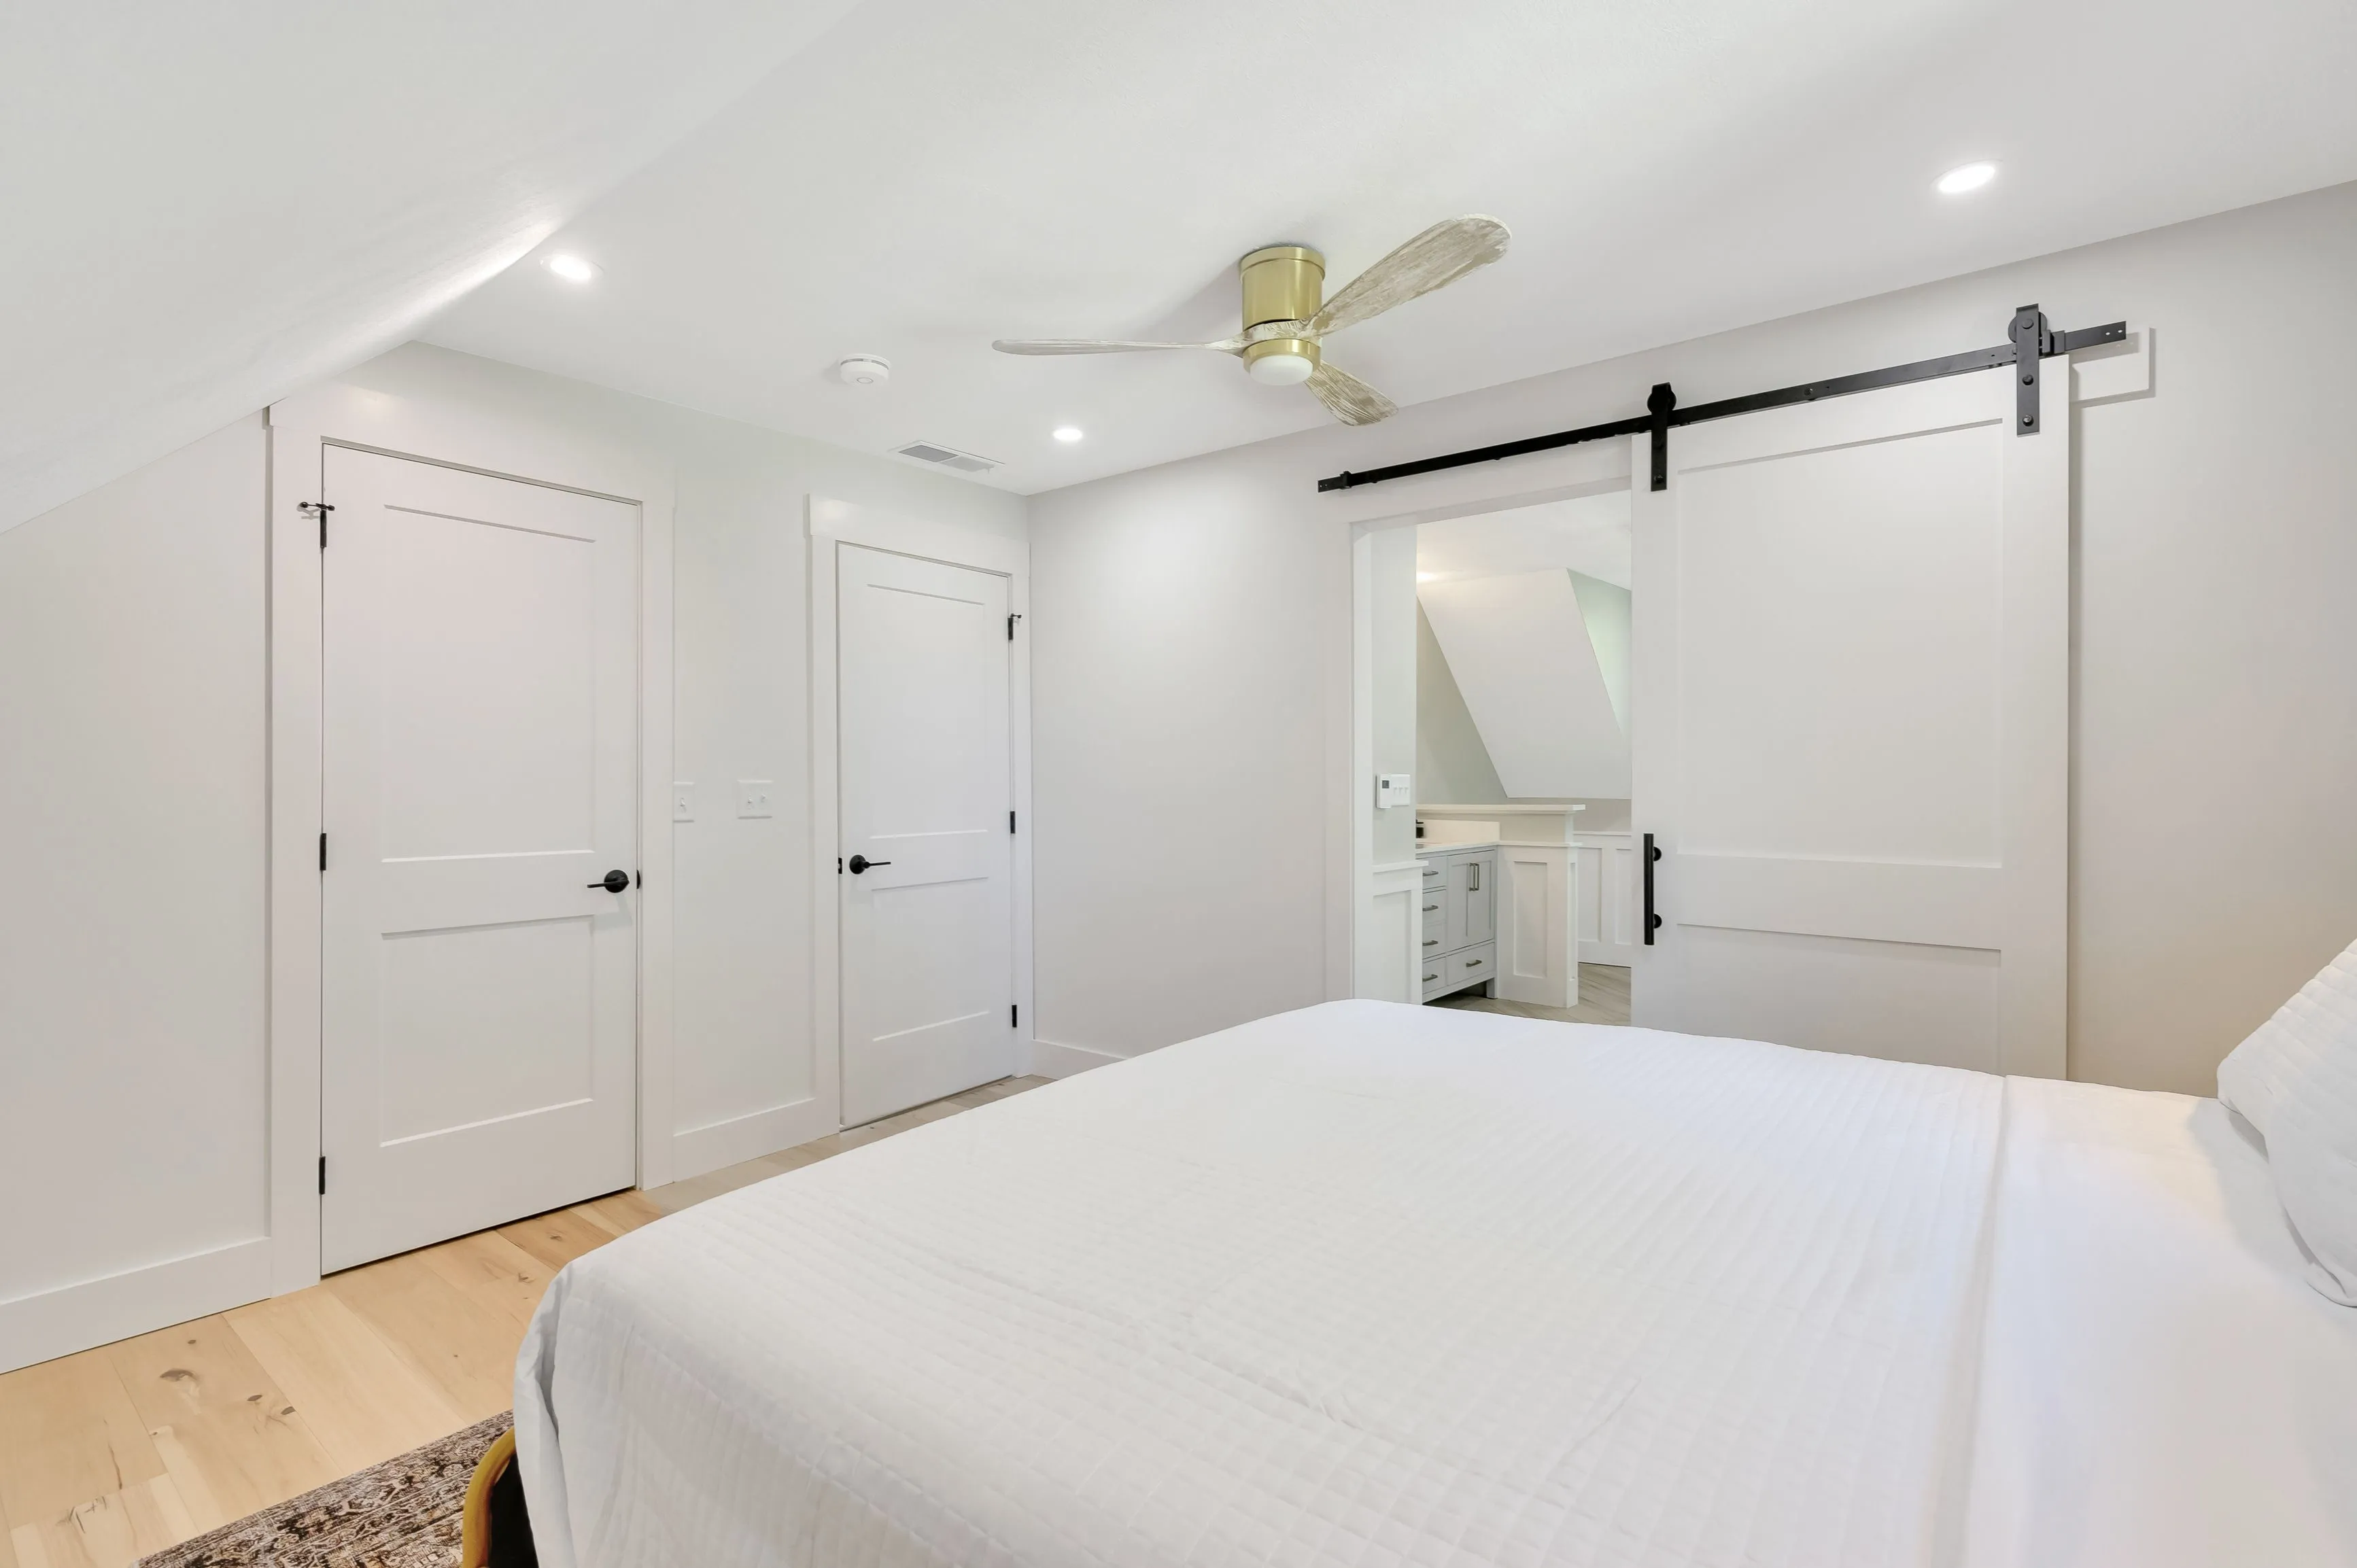 Bright contemporary bedroom with a large bed, white bedding, light wooden flooring, white walls, a ceiling fan, and a sliding barn door leading to an ensuite bathroom.